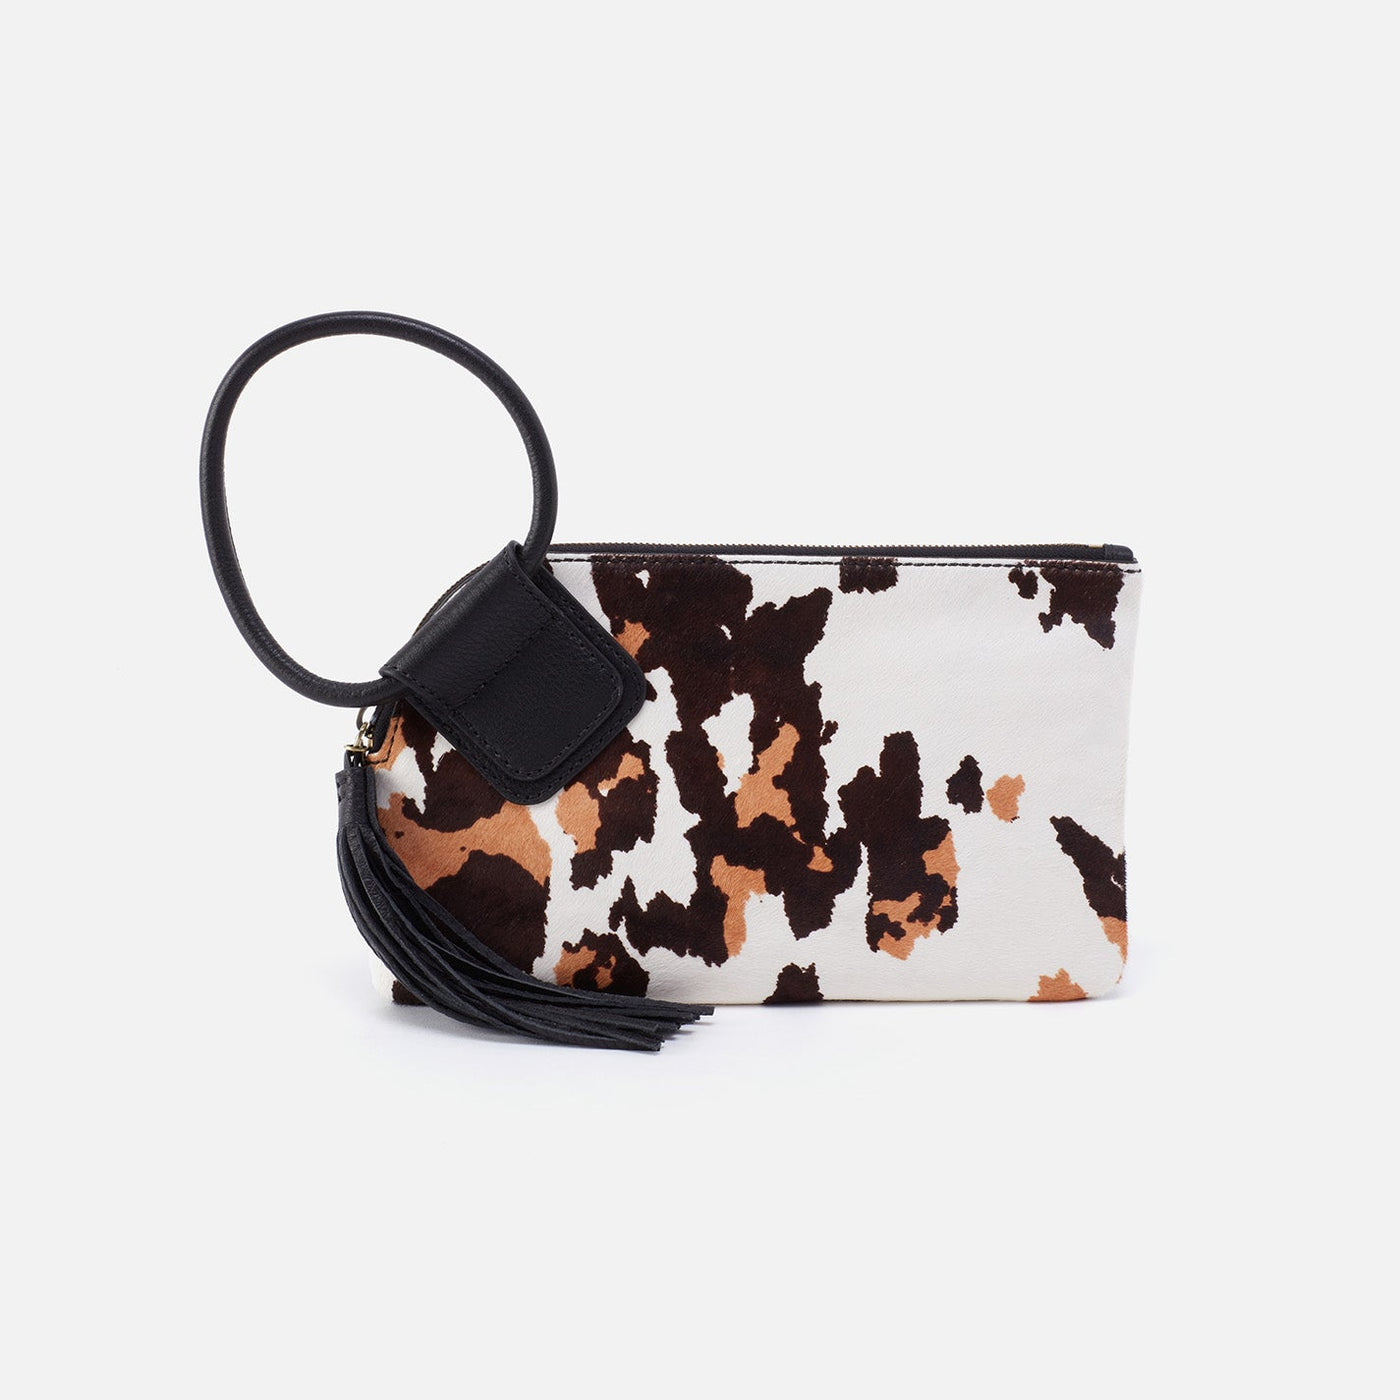 Sable Wristlet in Hair-On Leather - Cow Print Black and Brown